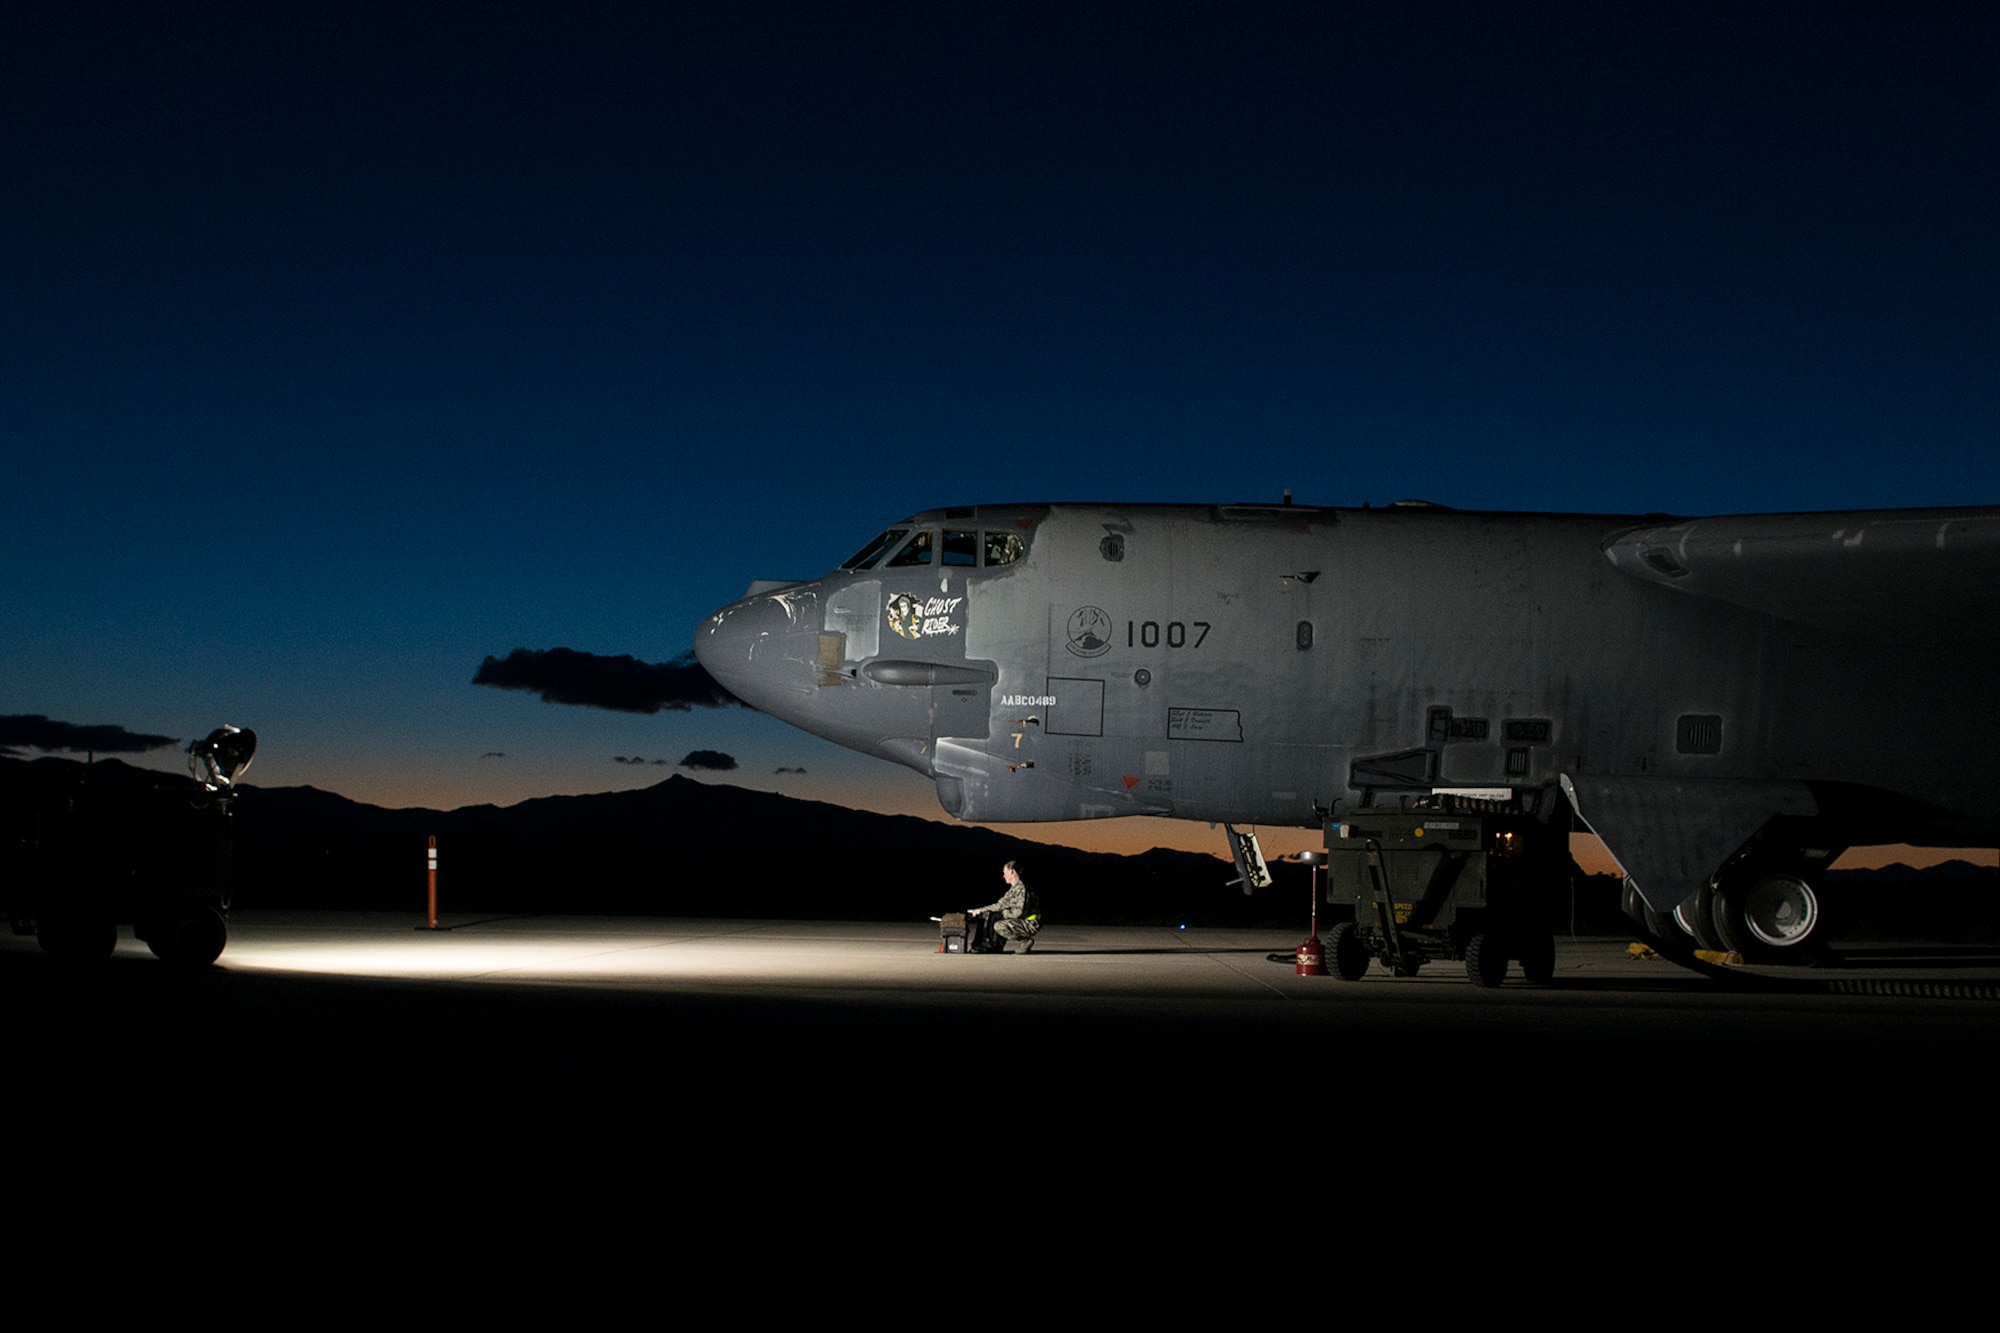 The sun rises behind the "Ghost Rider" as it is prepared for an early morning taxi test on Feb. 12, 2015, Davis-Monthan Air Force Base, Ariz. The B-52H Stratofortress was decommissioned in 2008 and has been sitting in the 309th Aerospace Maintenance and Regeneration Group's "Boneyard", but is being restored to join the active fleet of B-52s. (U.S. Air Force photo by Master Sgt. Greg Steele/Released)